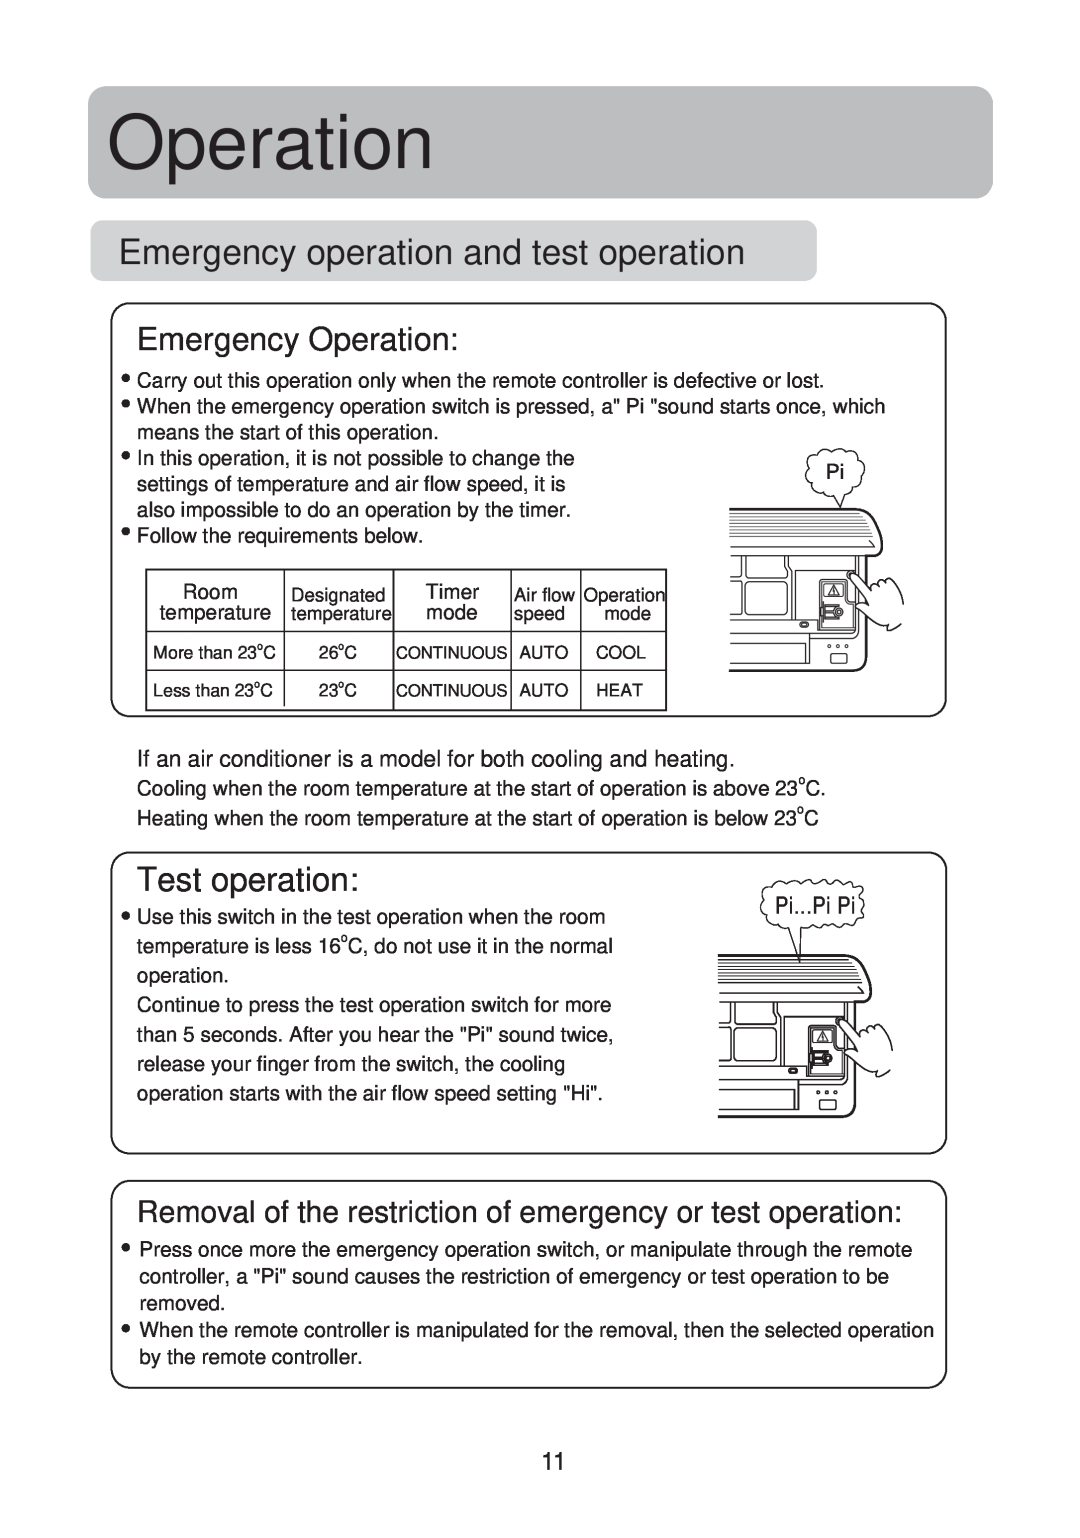 Haier No. 0010551809 Emergency operation and test operation, Emergency Operation, Test operation, Pi...Pi Pi 